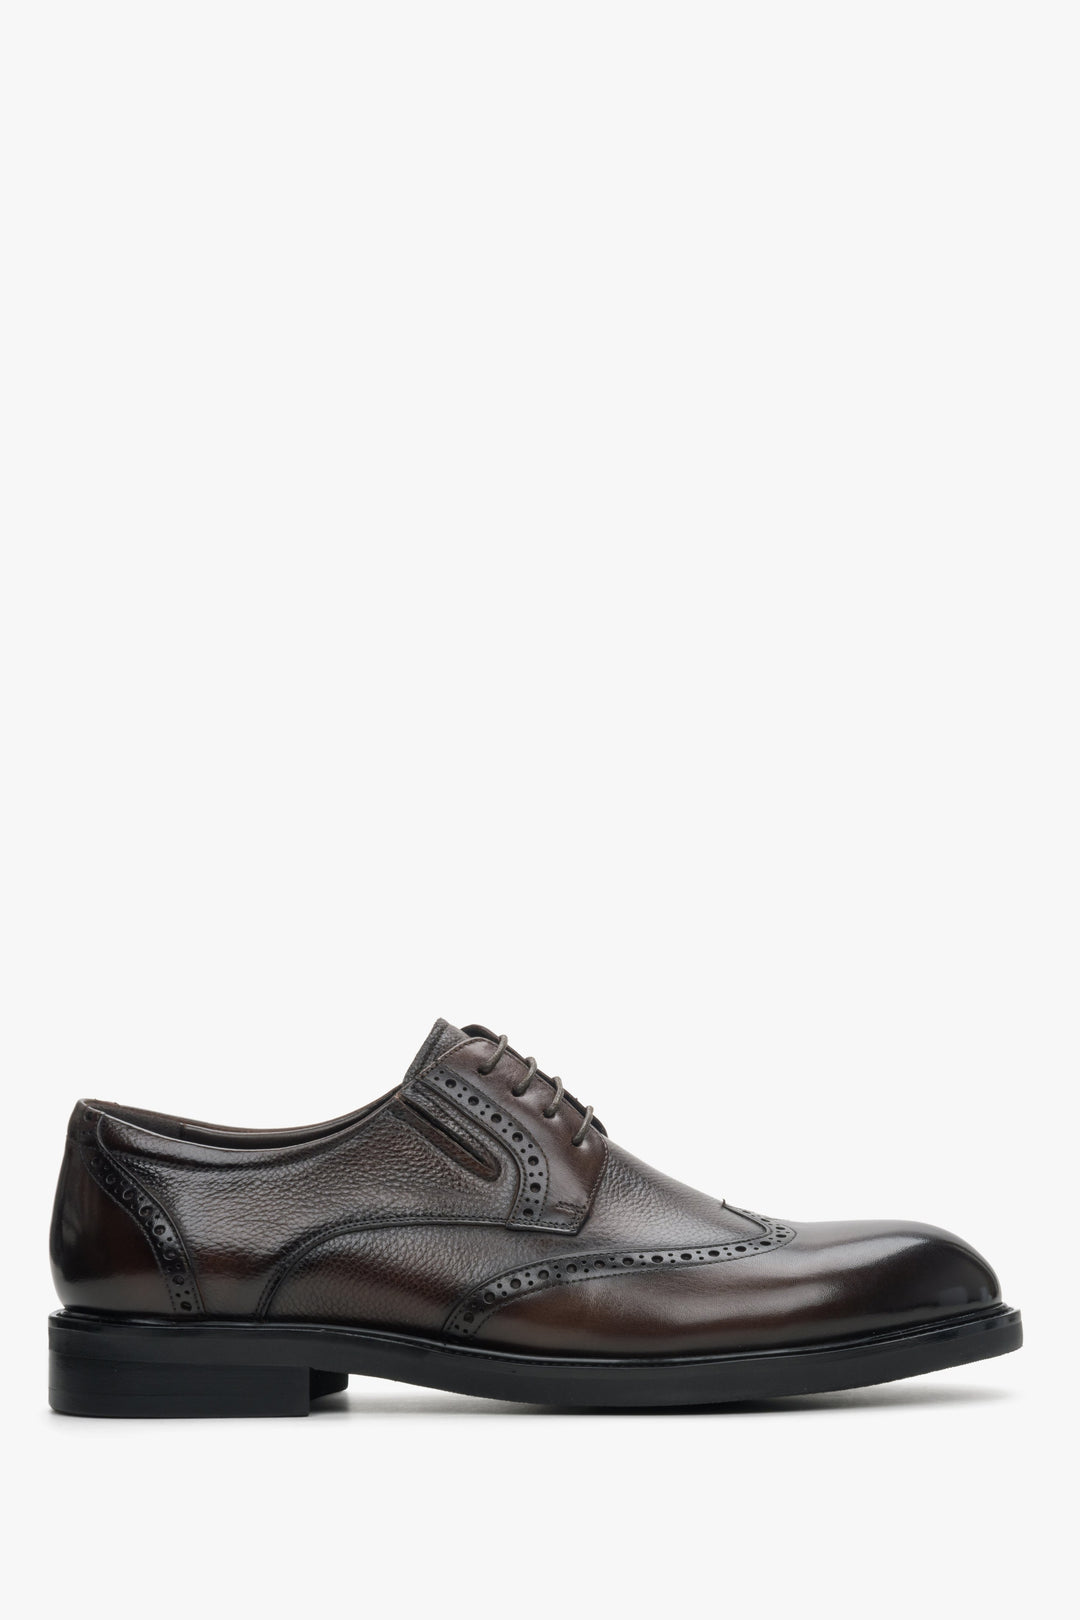 Men's Brown Leather Brogues with Decorative Perforation Estro ER00114401.